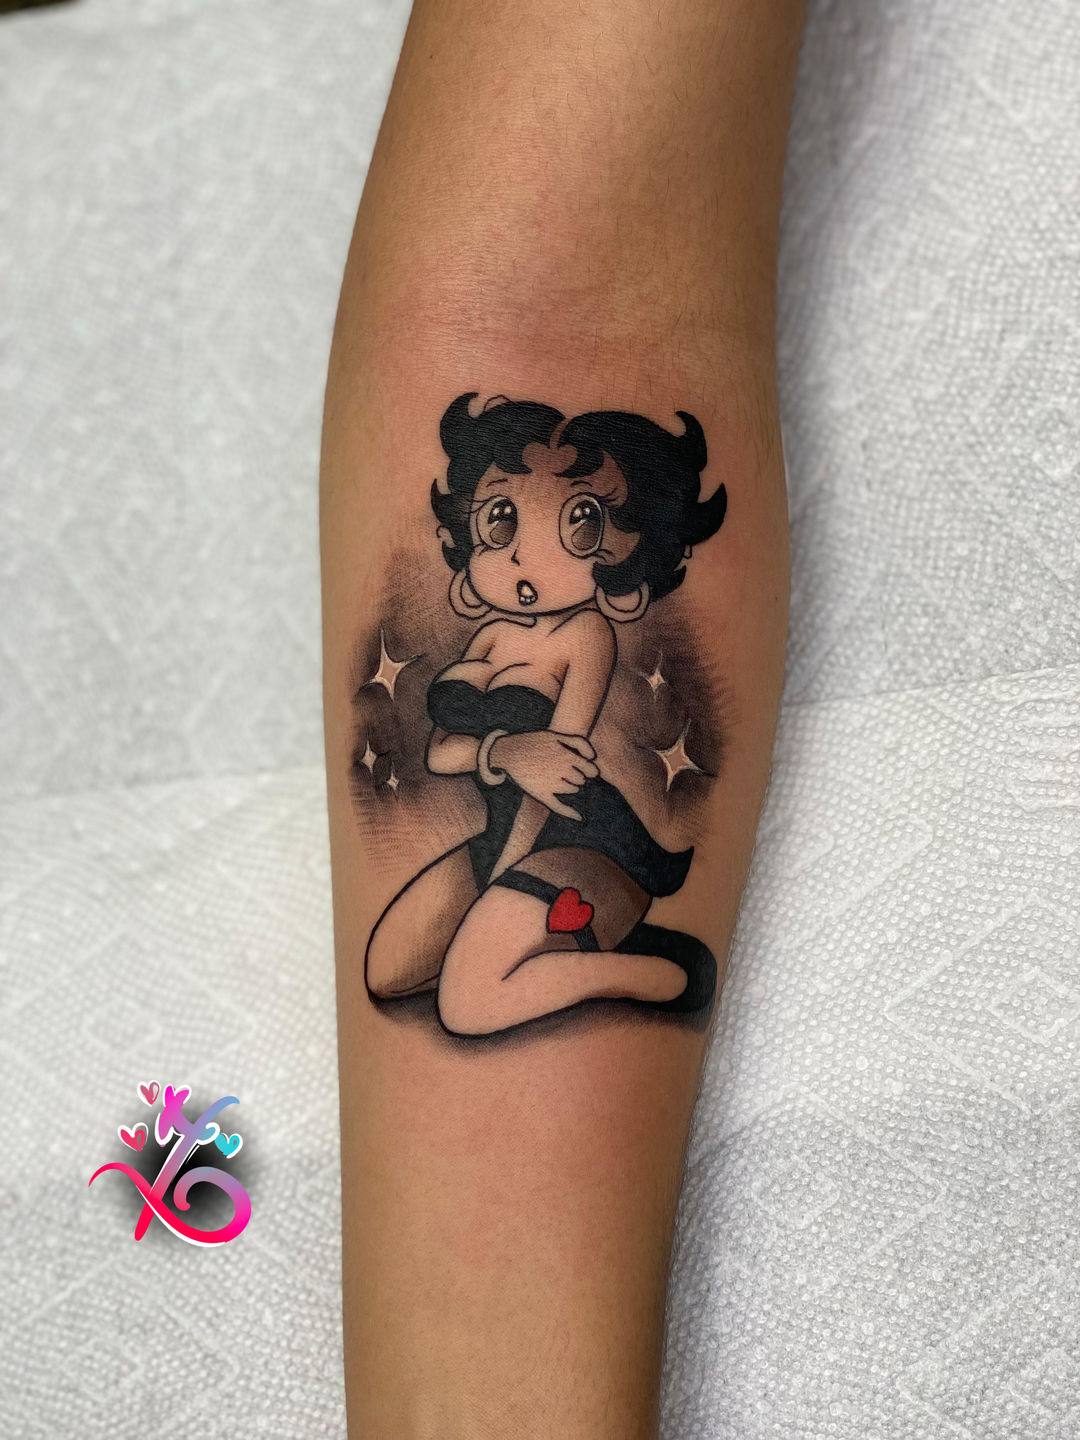 Some of my favorite Betty Boop tattoos that I've done ❤️ Part I! #bett... |  TikTok